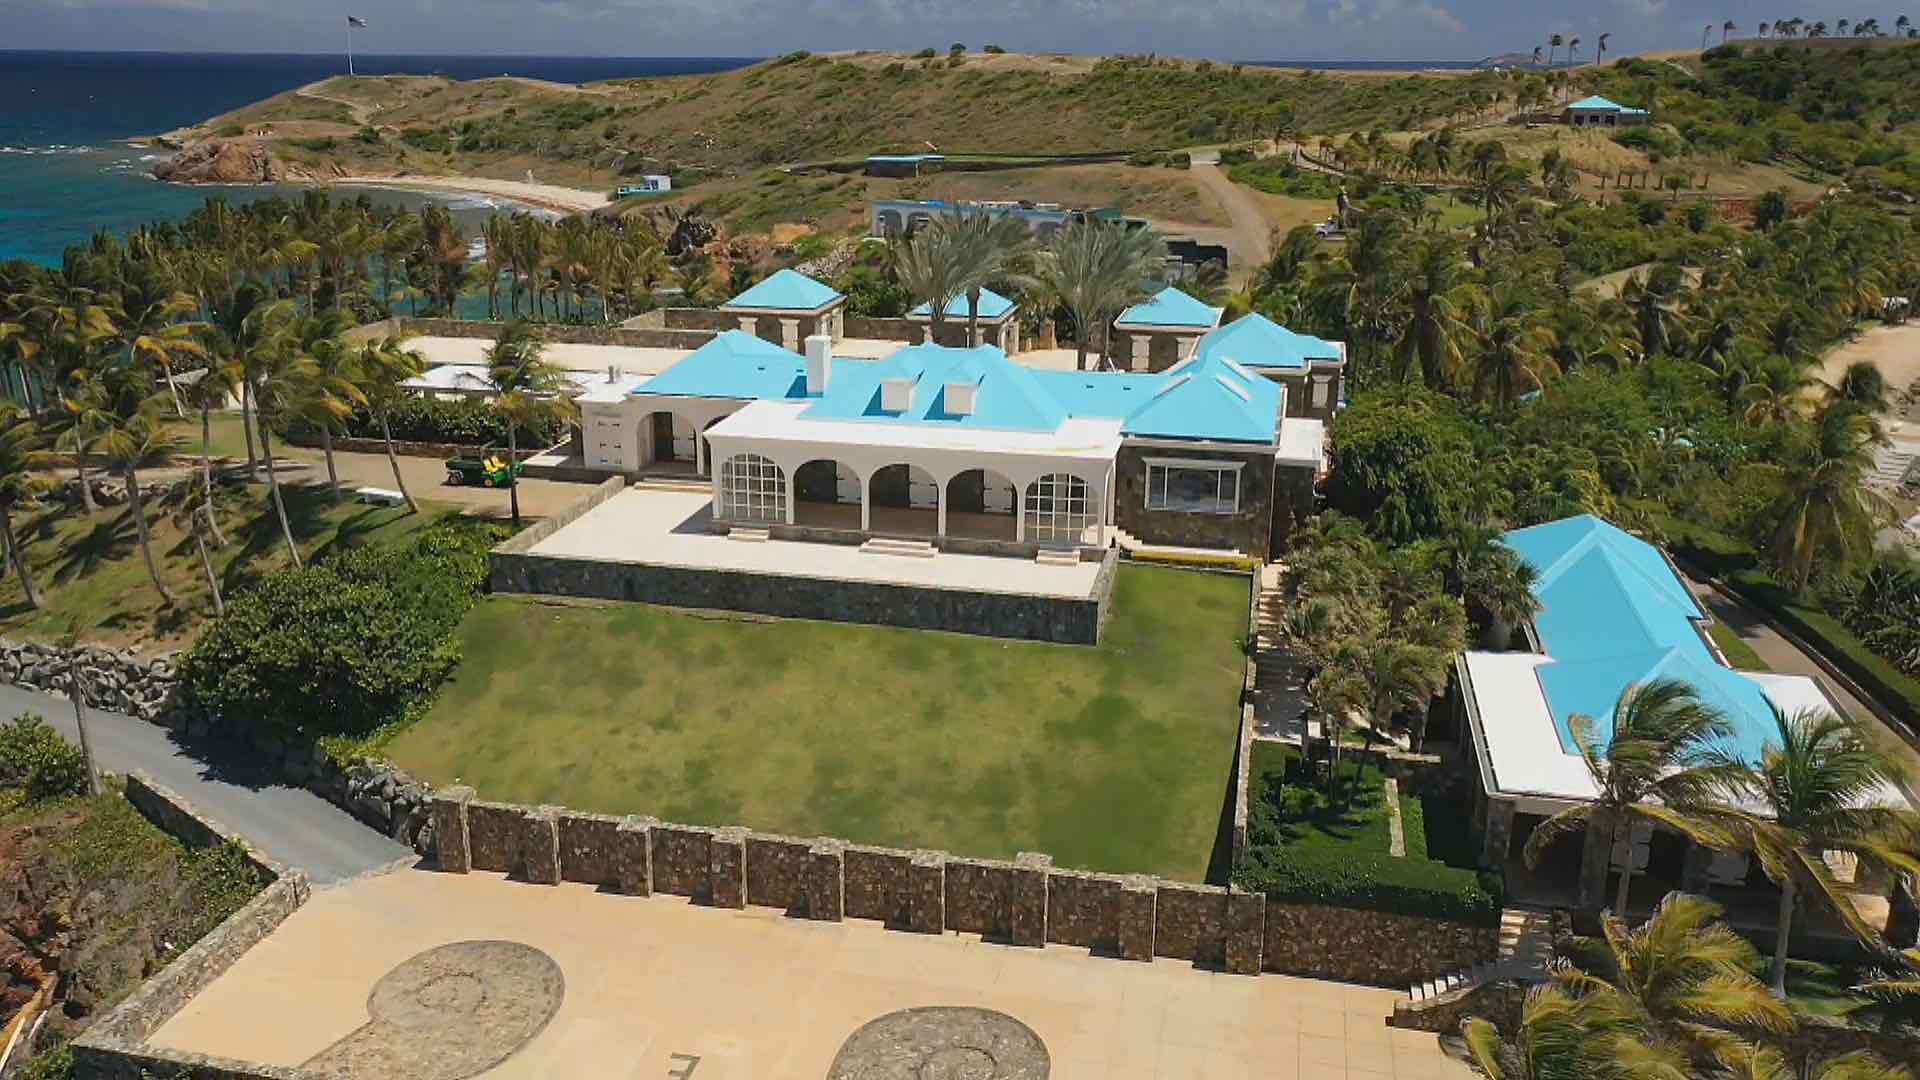 Did you know you can virtually visit Jeffrey Epstein #39 s island? Here #39 s